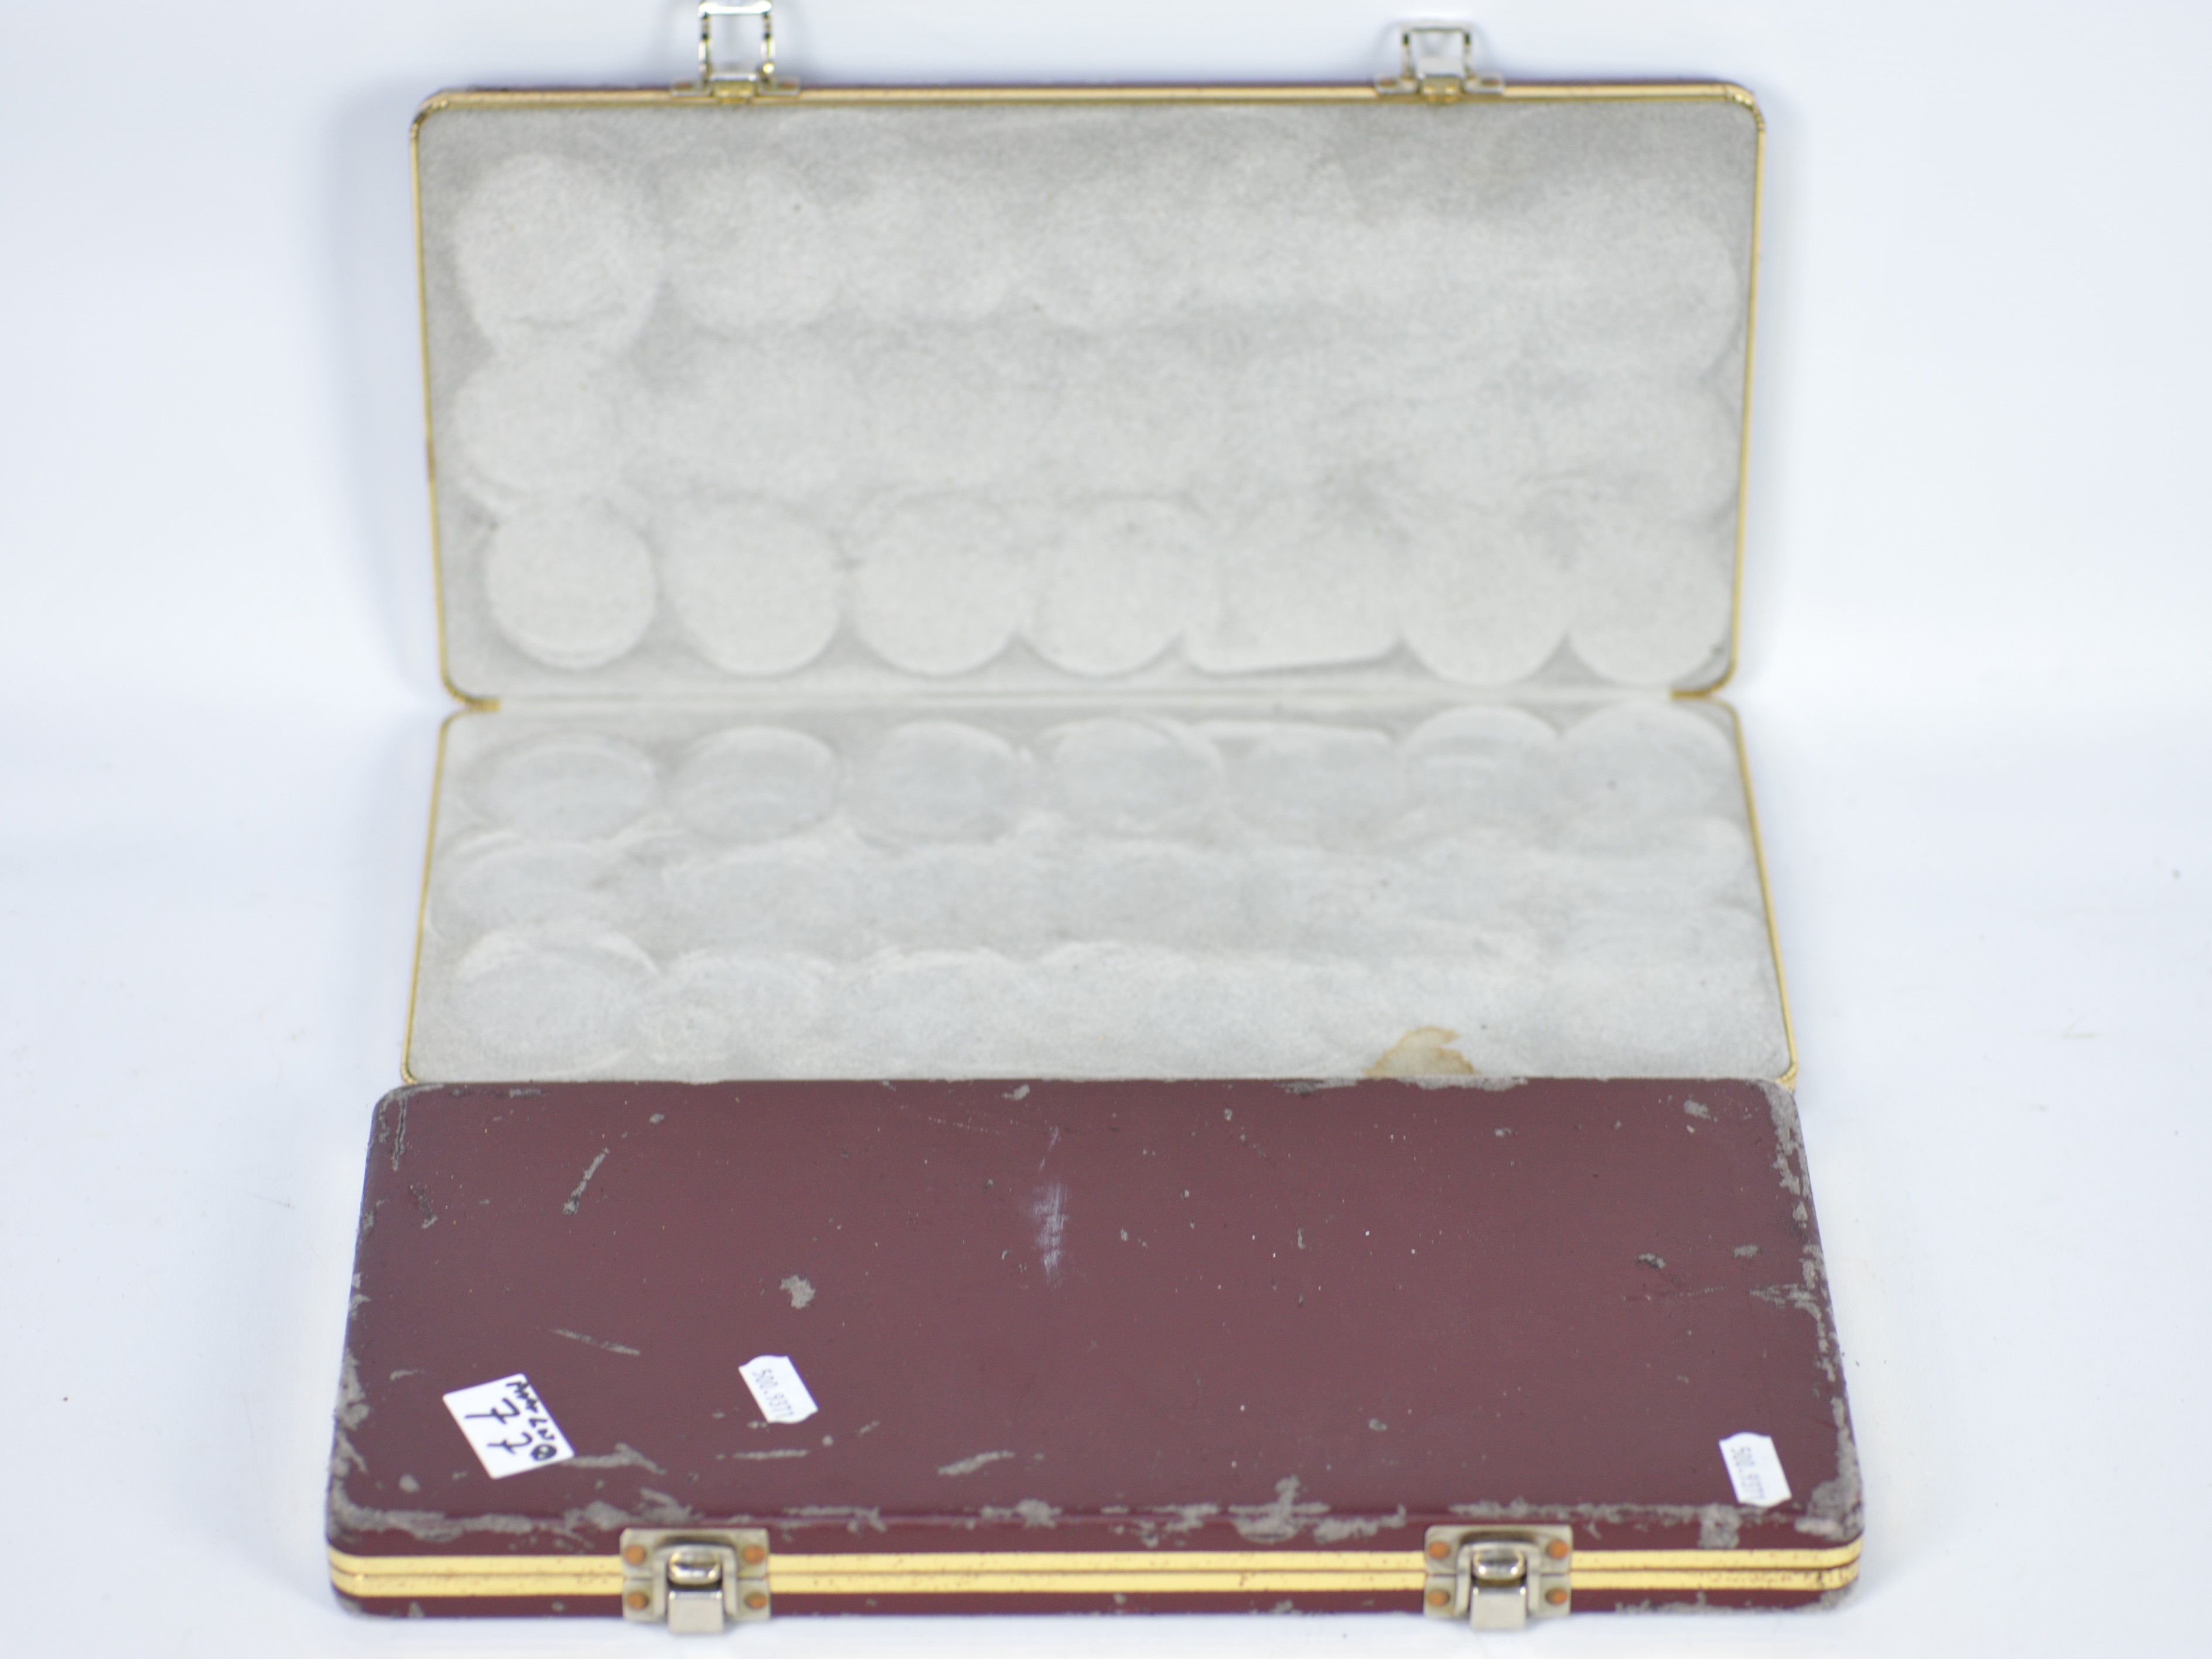 Two Liberty mint coin / medallion display cases in burgundy with a sponge and felt linning.